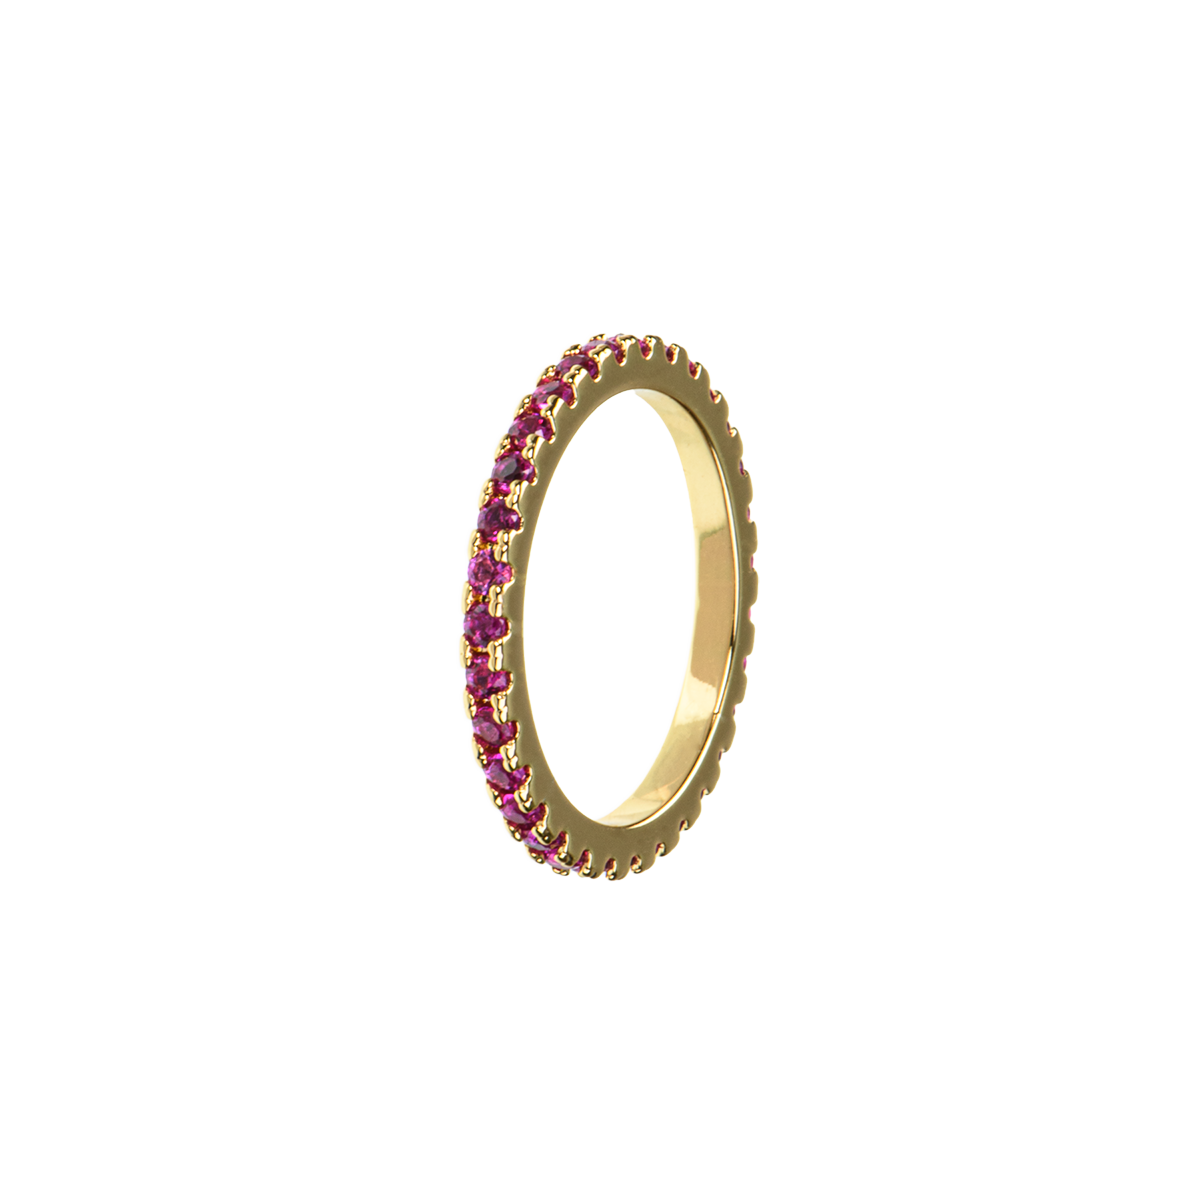 Image of Ring Cerise 49mm from Emilia by Bon Dep